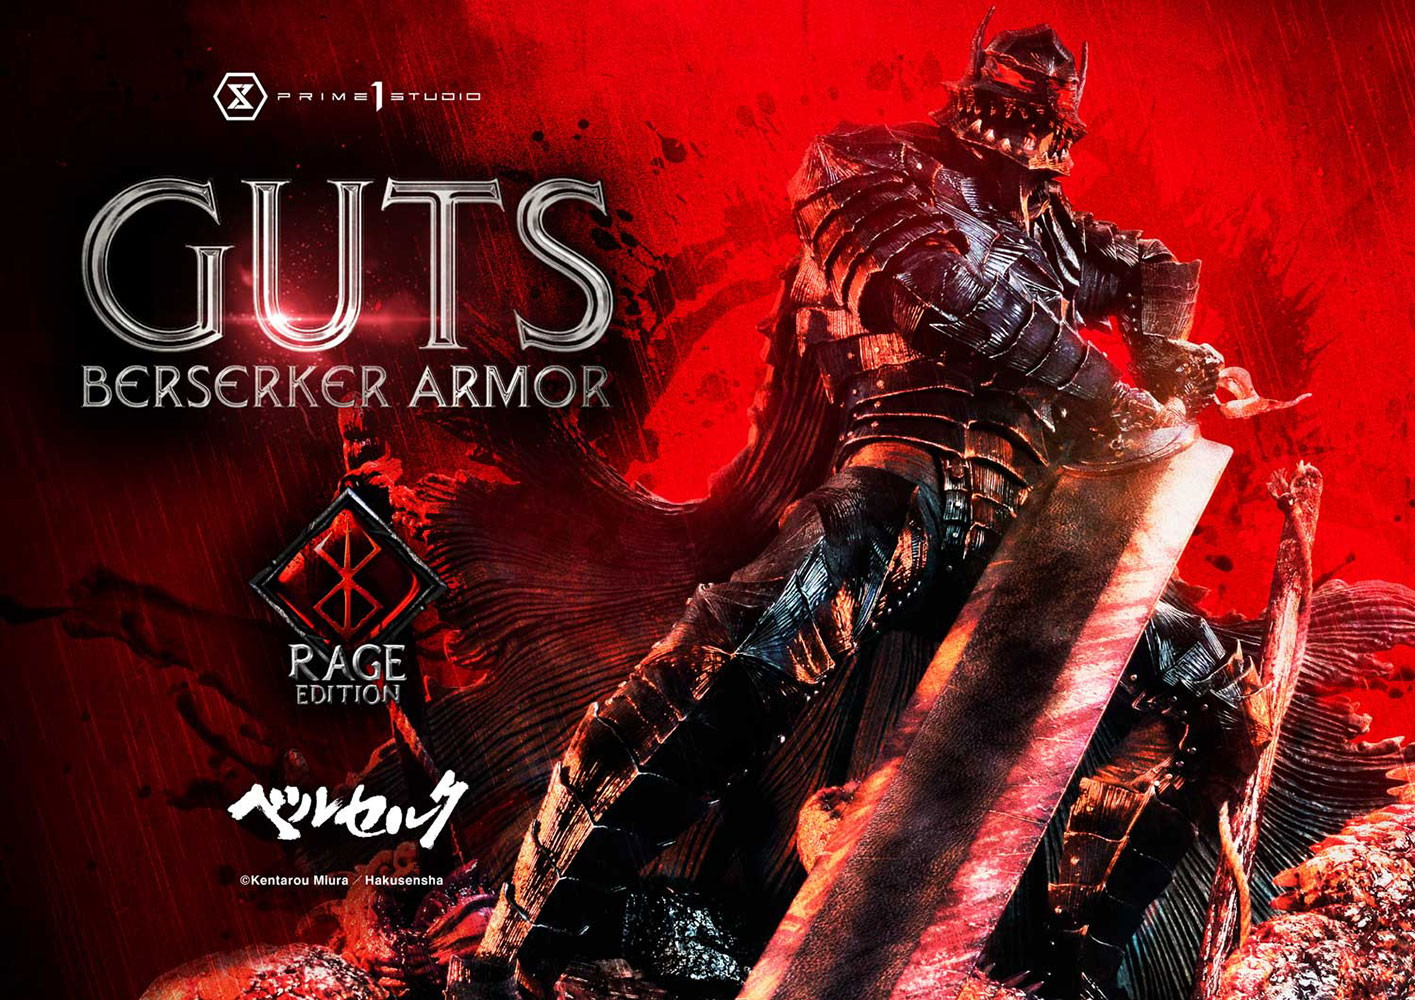 Guts Berserker Armor (Rage Edition) Collector Edition (Prototype Shown) View 48